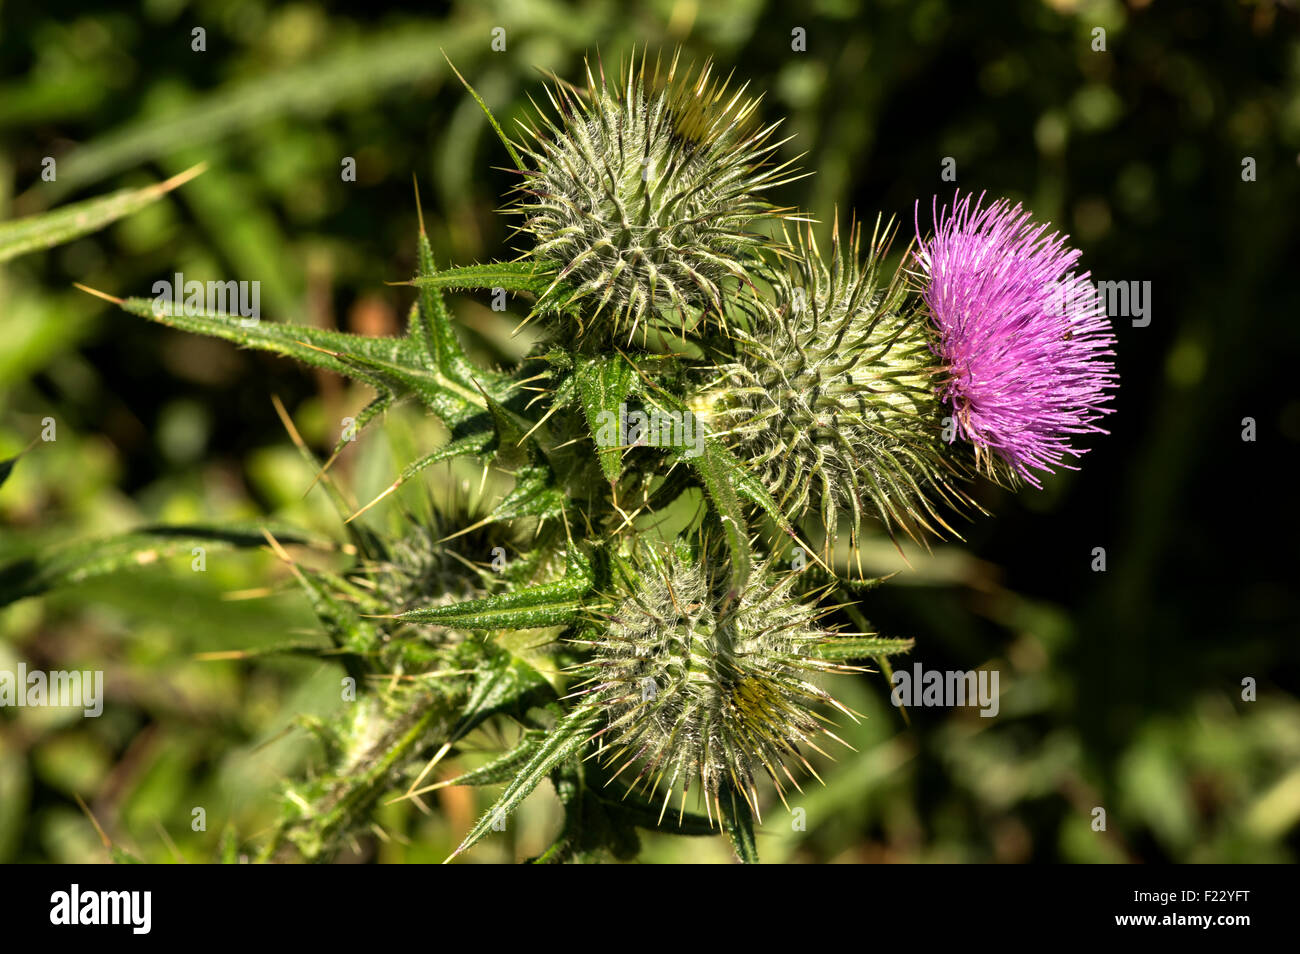 Spear Thistle. Widespread on waste ground, roadsides and rough pasture Stock Photo